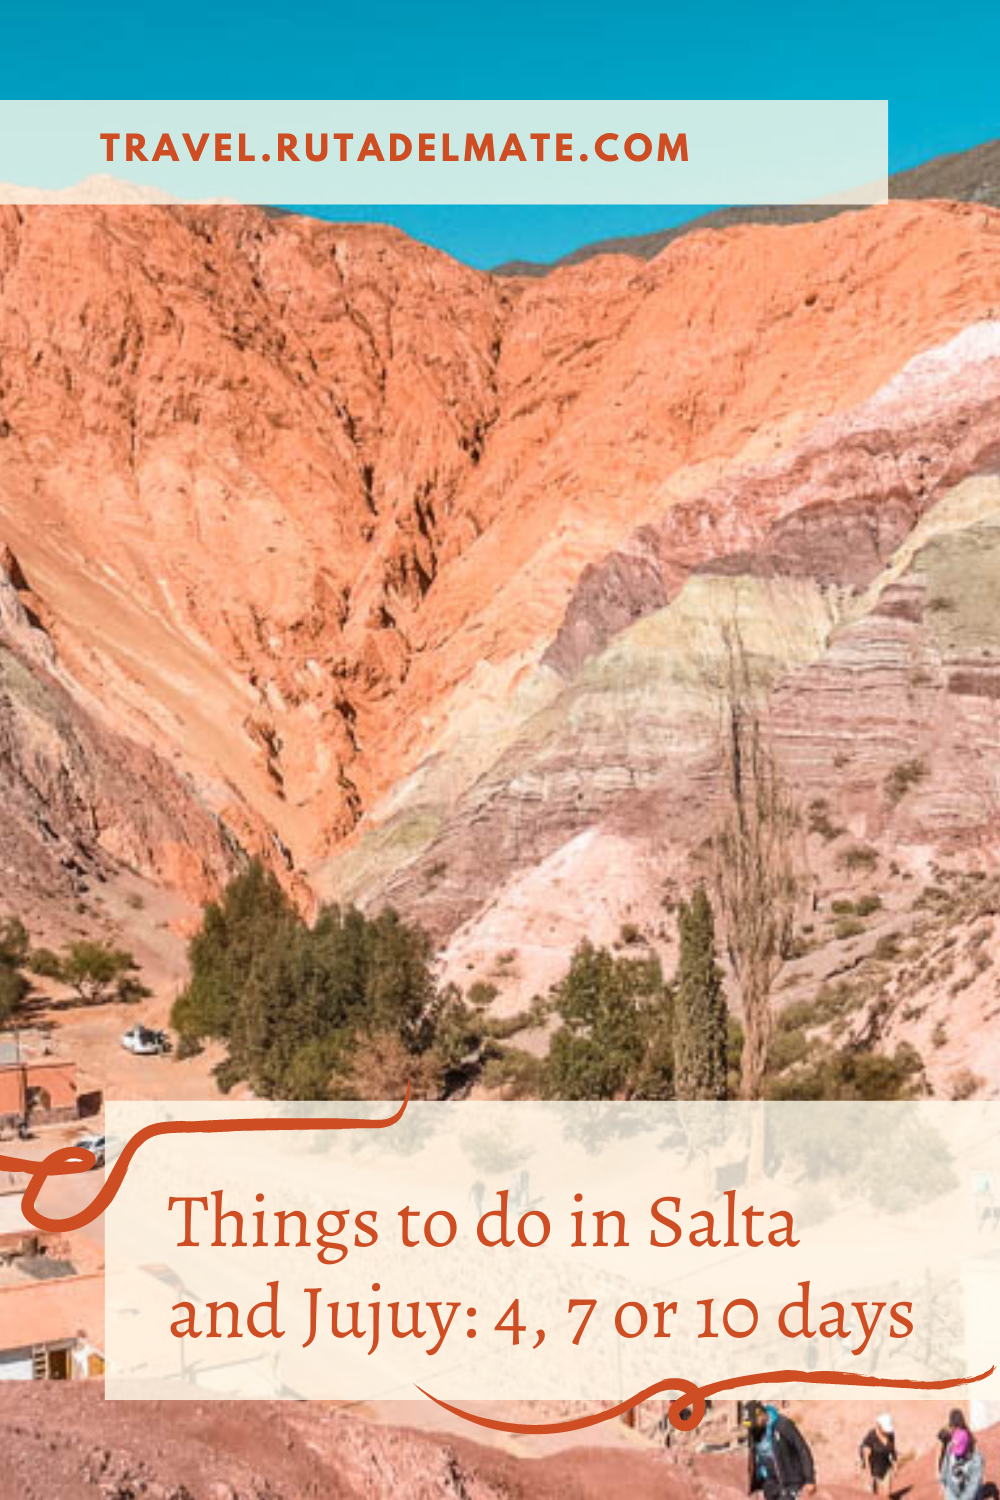 Things to do in Salta and Jujuy